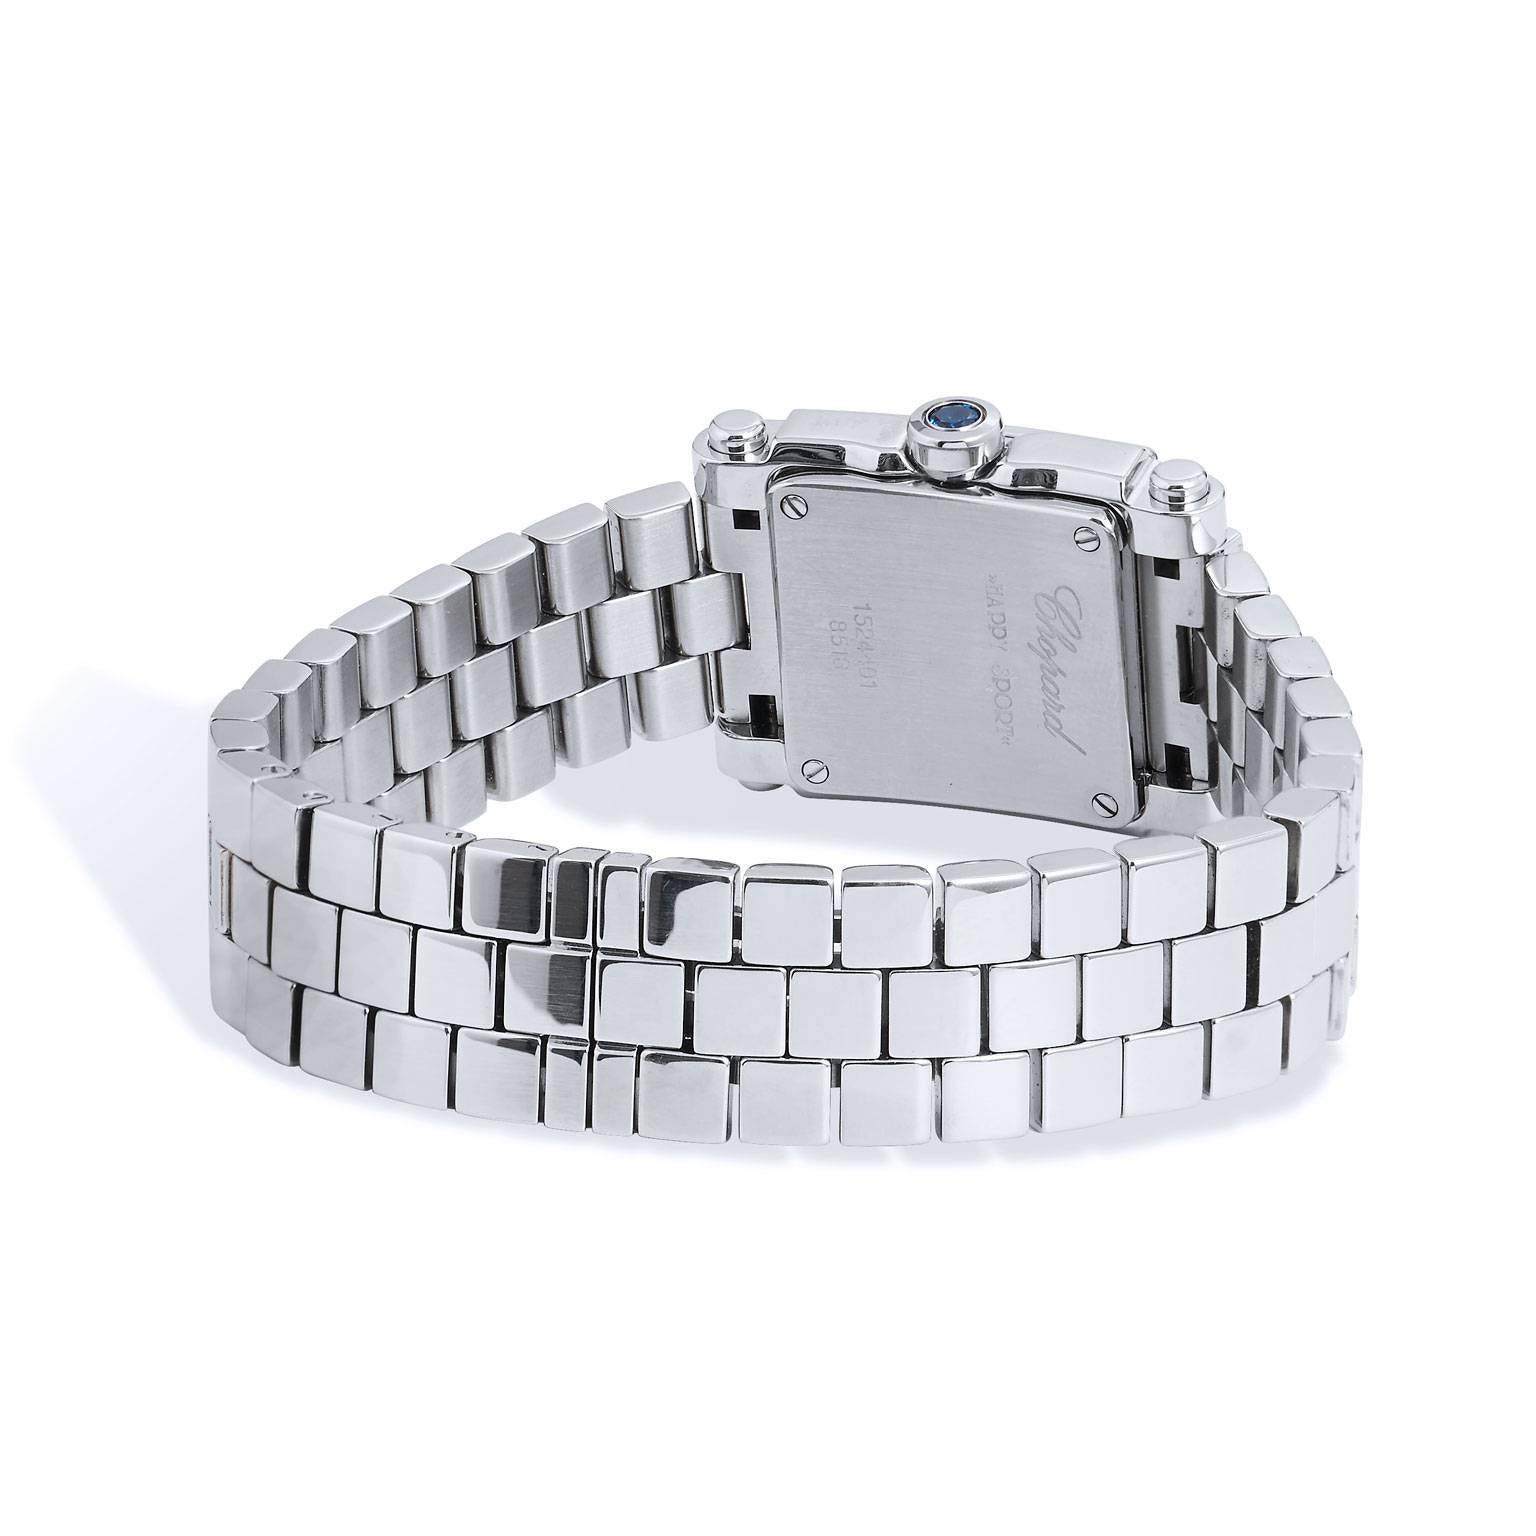 The Chopard SS Happy Collection Sport quartz with MOP dial, 0.48 ct diamond bezel, 0.14 ct blue sapphire and 0.15 ct moving diamonds with SS bracelet is modern, flirty and fun. The square structure of the diamond set bezel sends a statement of